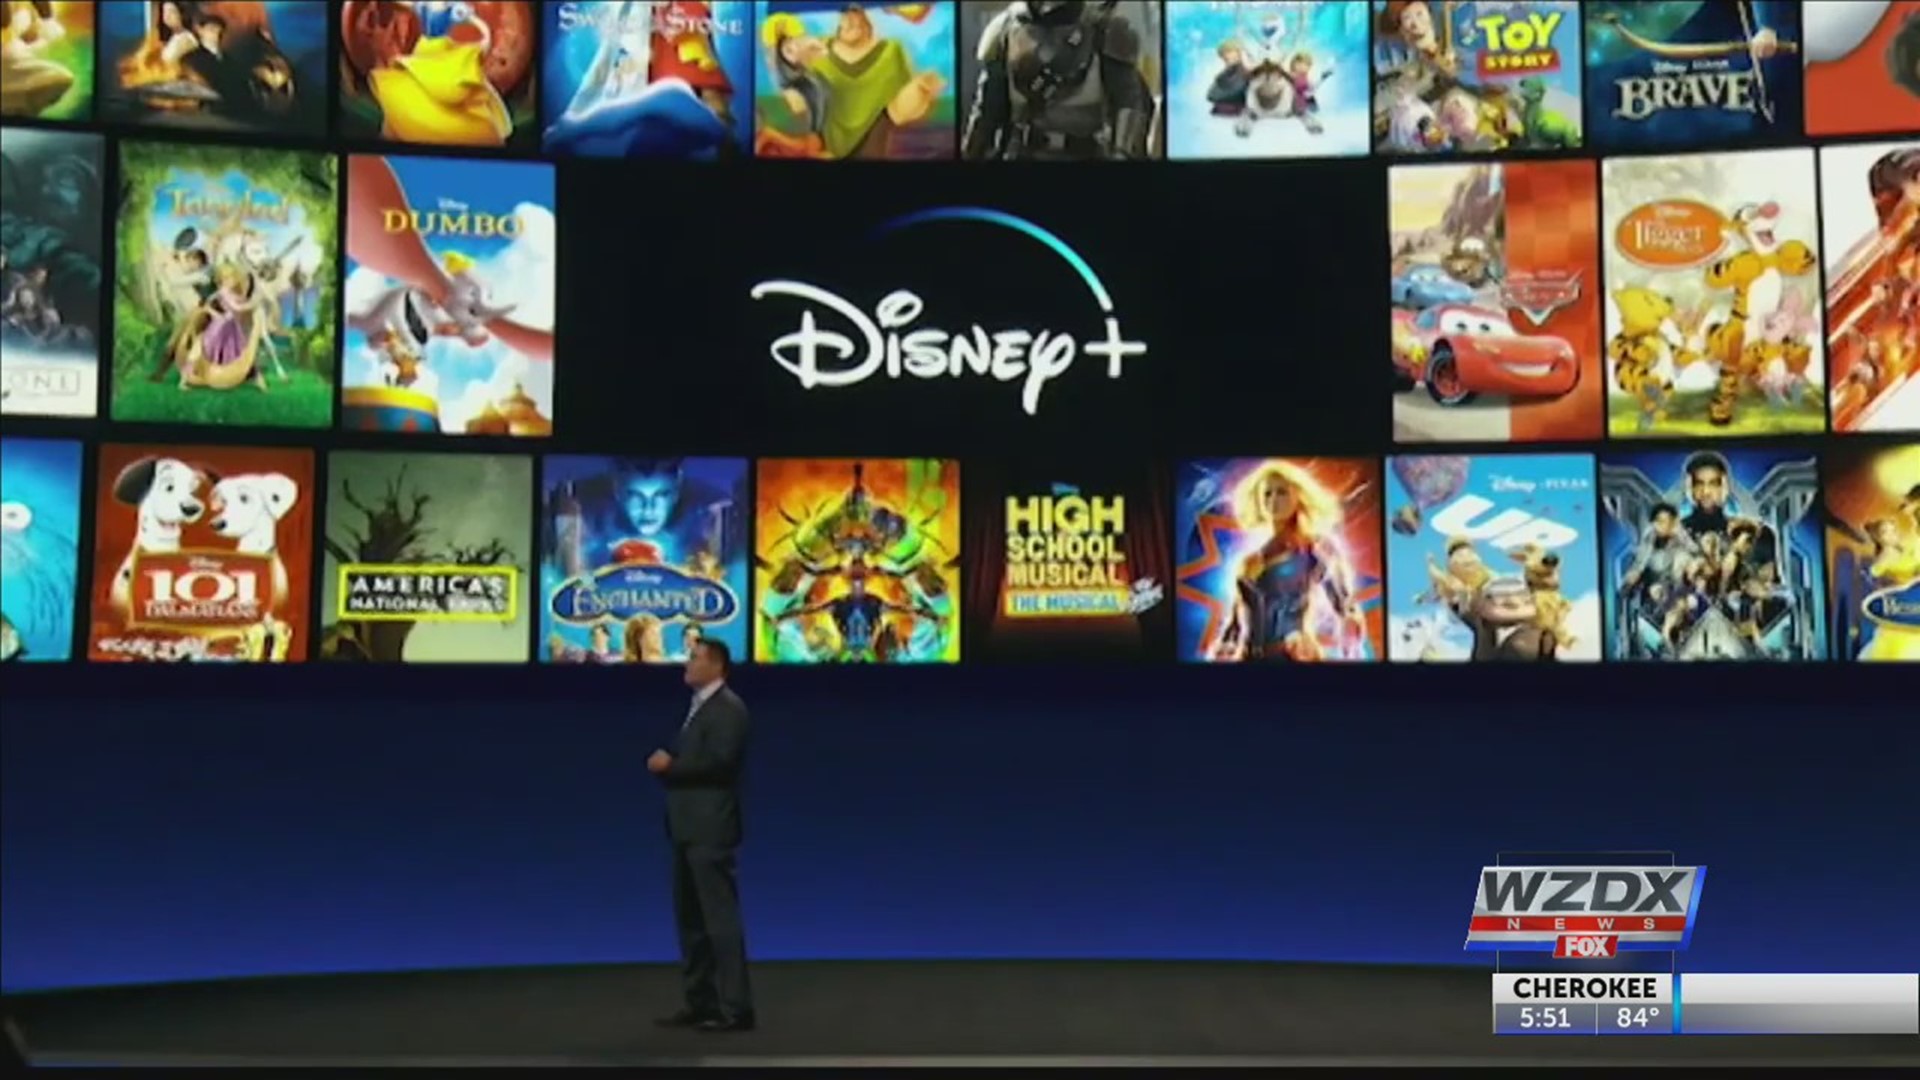 Disney's new streaming service, Disney+, is now available for pre-order.